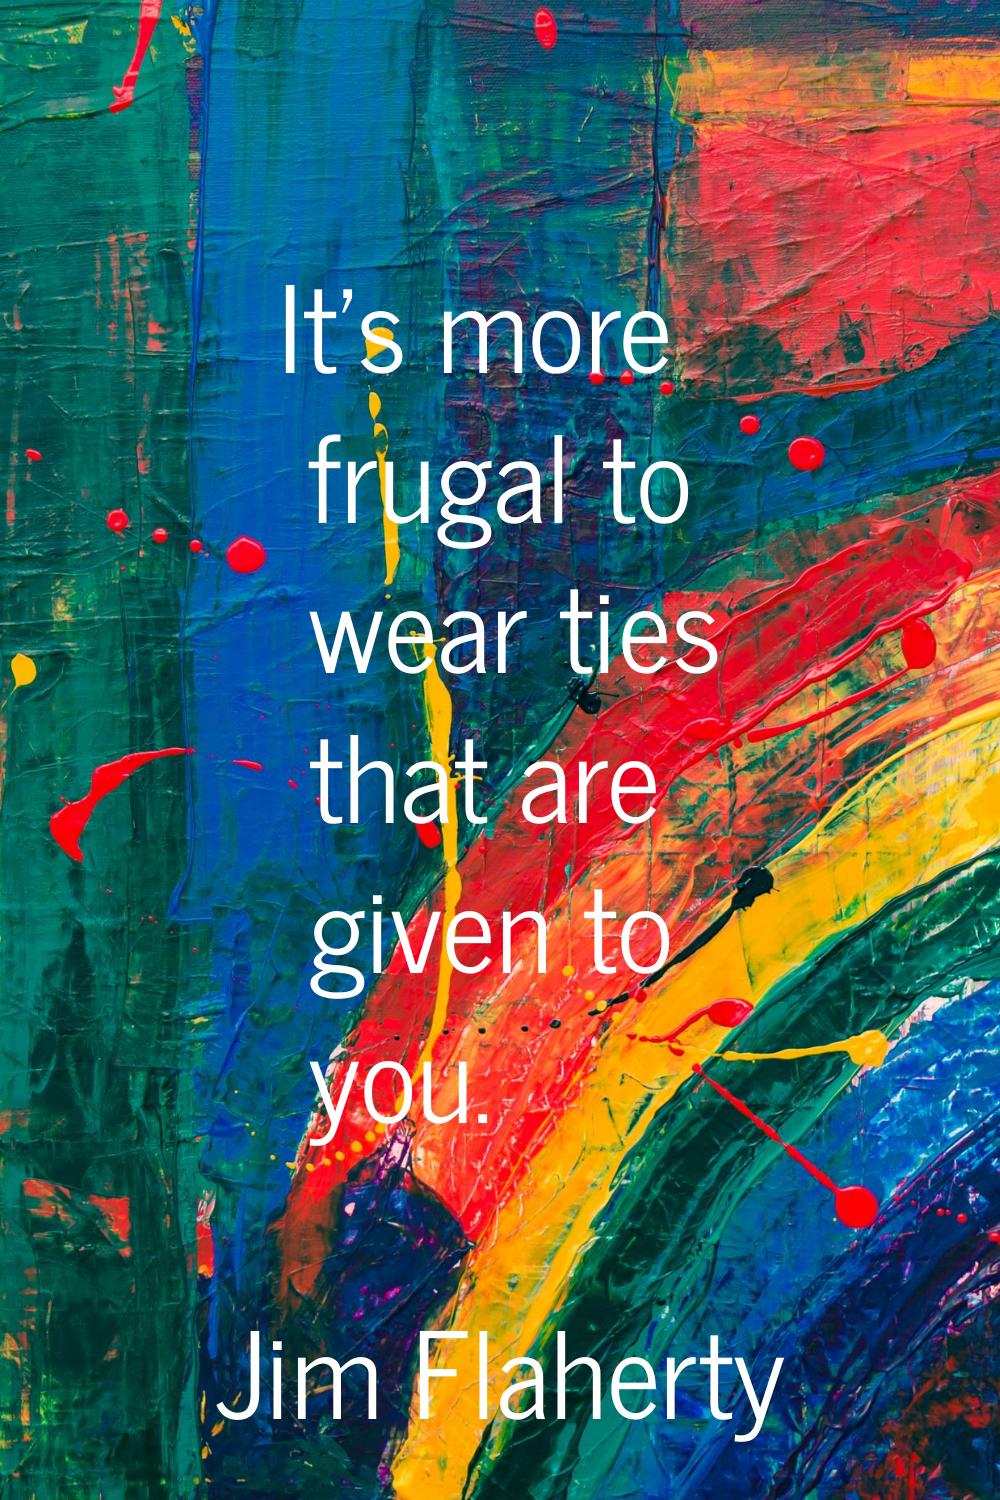 It's more frugal to wear ties that are given to you.